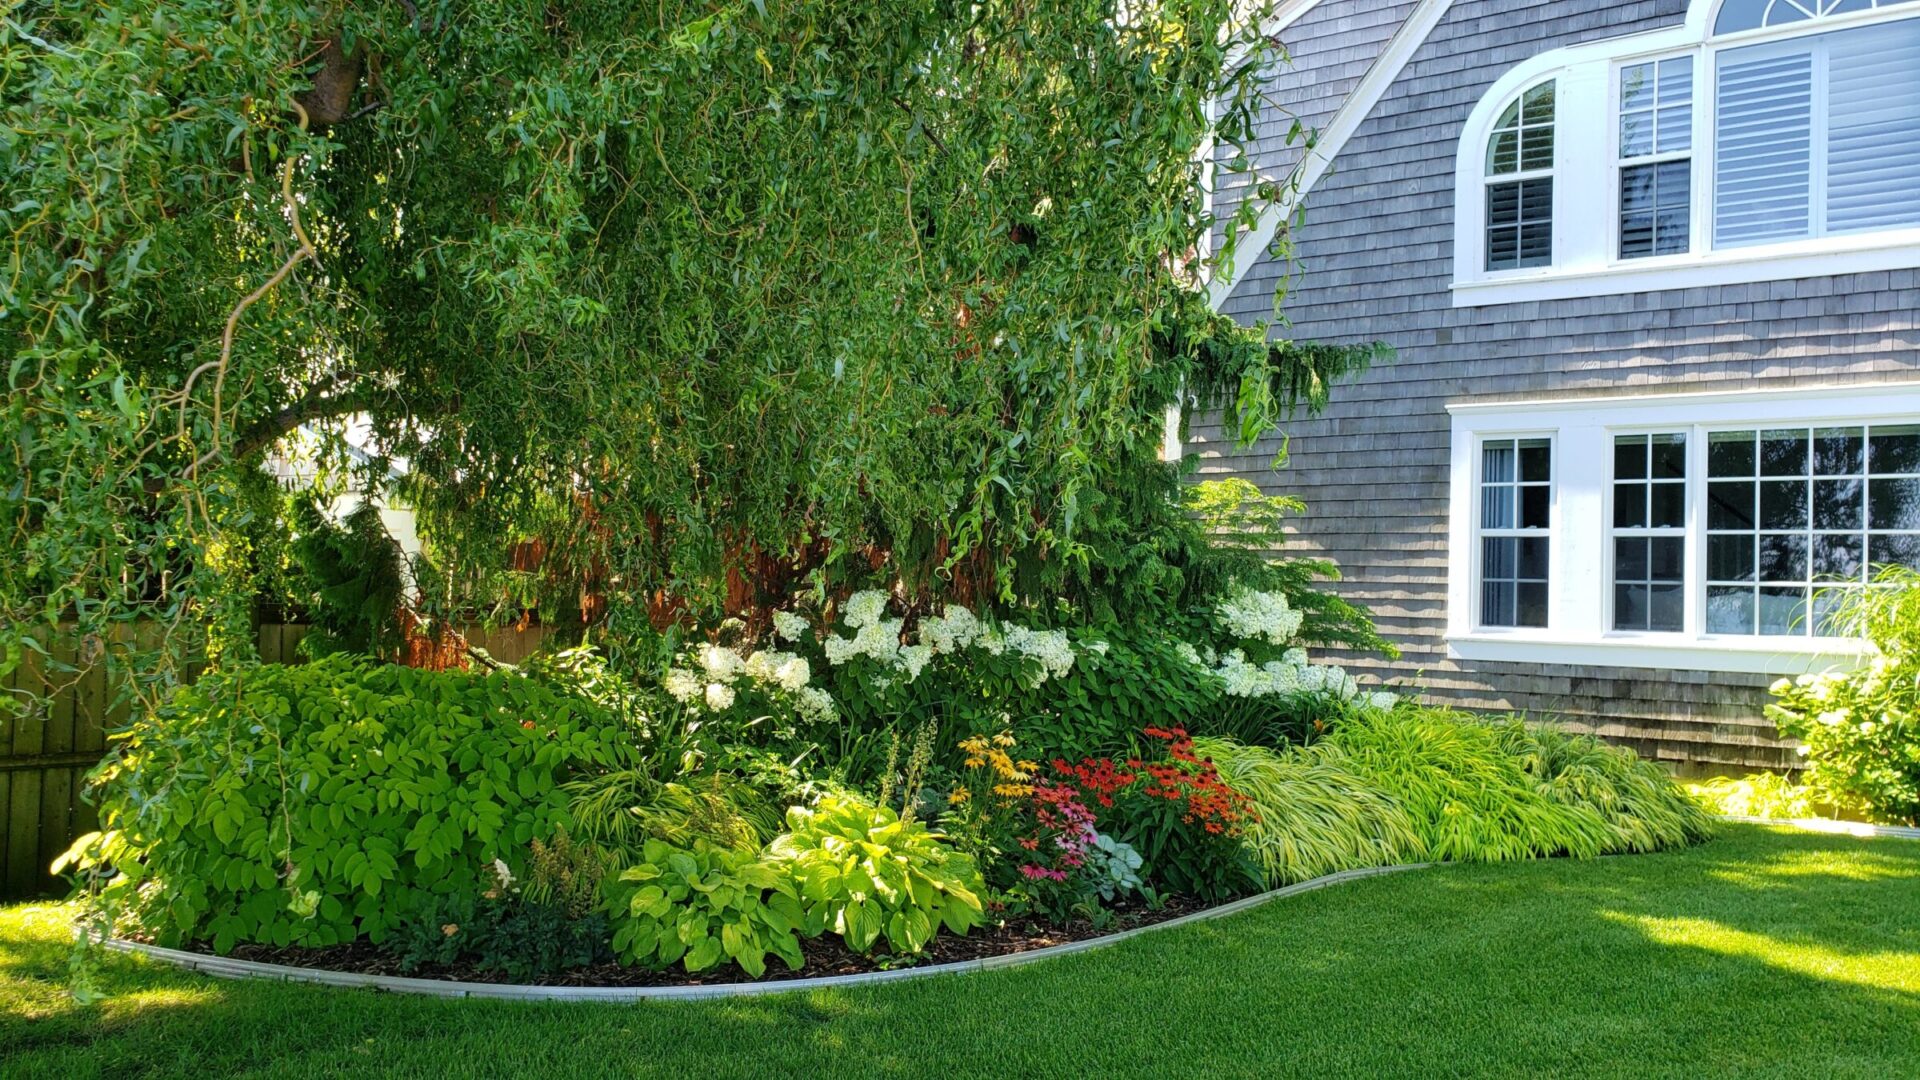 A well-manicured garden in front of a gray house with white windows, featuring a variety of green plants and colorful flowers under a sunny sky.